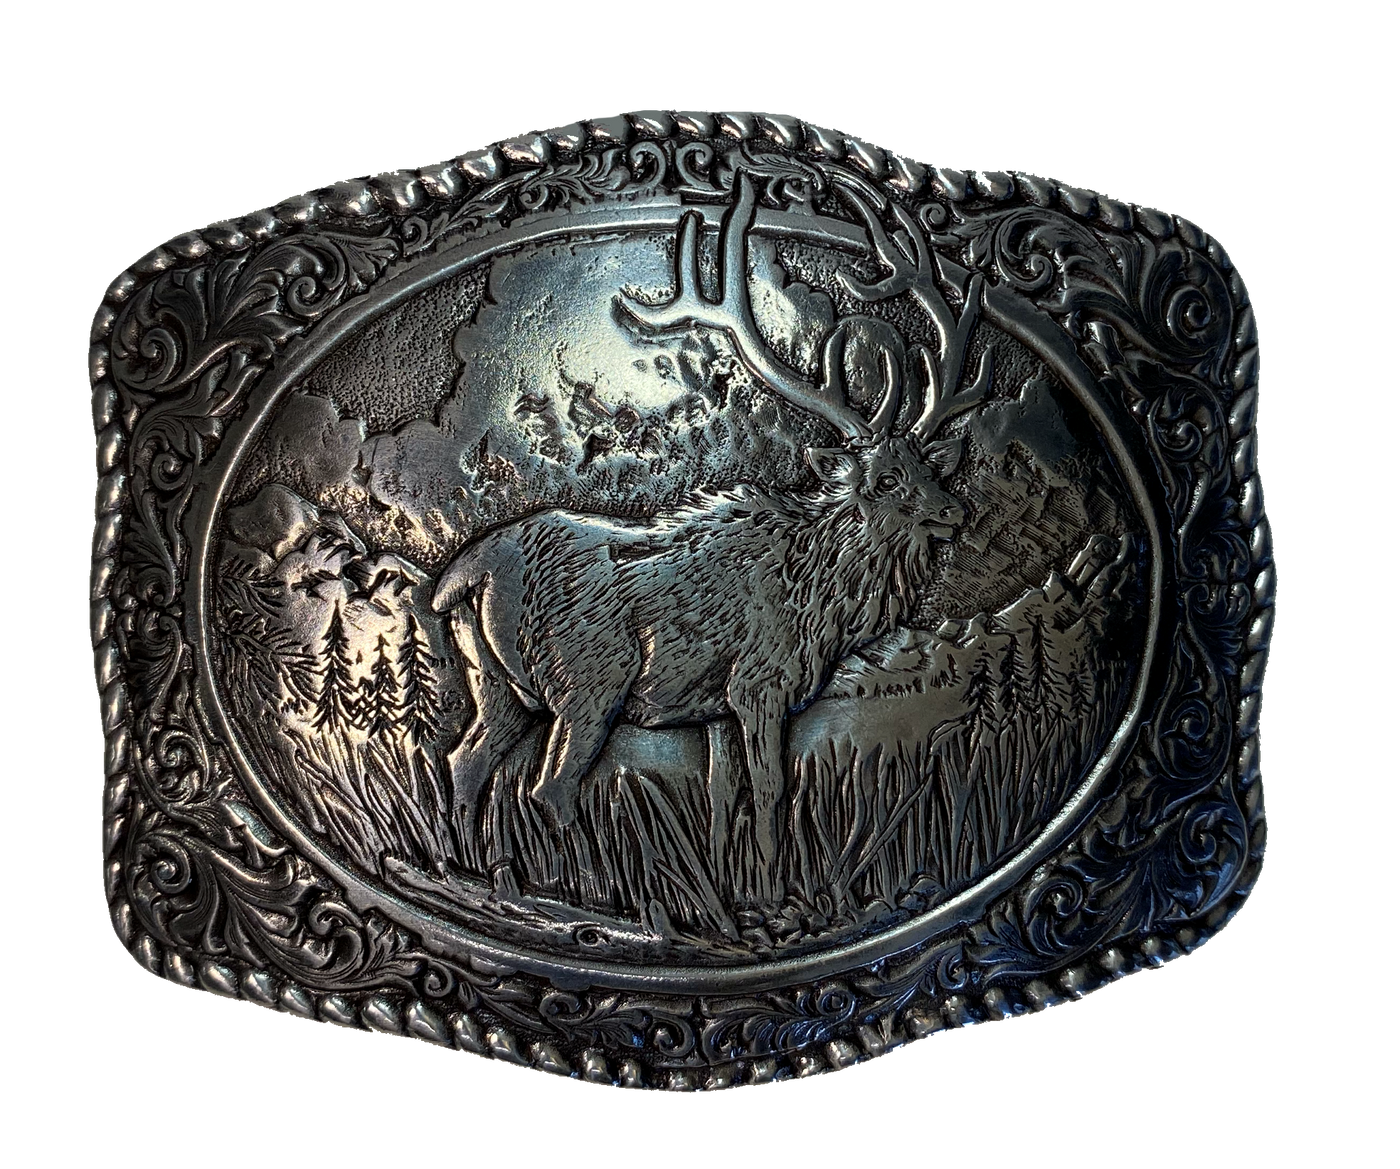 Crumrine buckle with Rope edging with Elk This buckle will look great with your favorite pair of jeans or dress pants.  Measures 2-3/4 x 3-1/2.  Available at our shop just outside Nashville in Smyrna, TN.